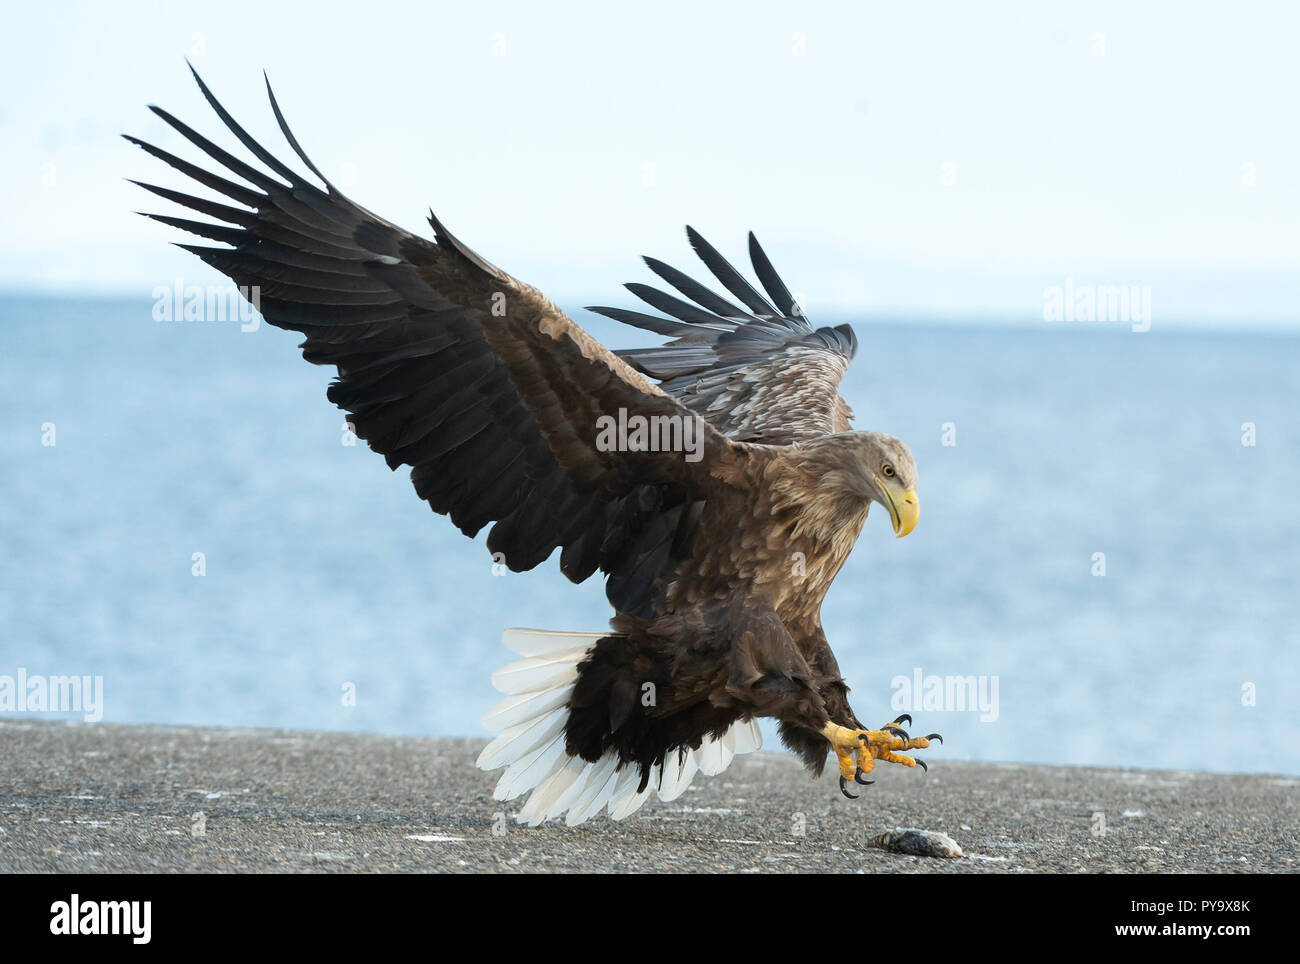 Adult White tailed eagle in flight. Blue sky and ocean background. Scientific name: Haliaeetus albicilla, also known as the ern, erne, gray eagle, Eur Stock Photo